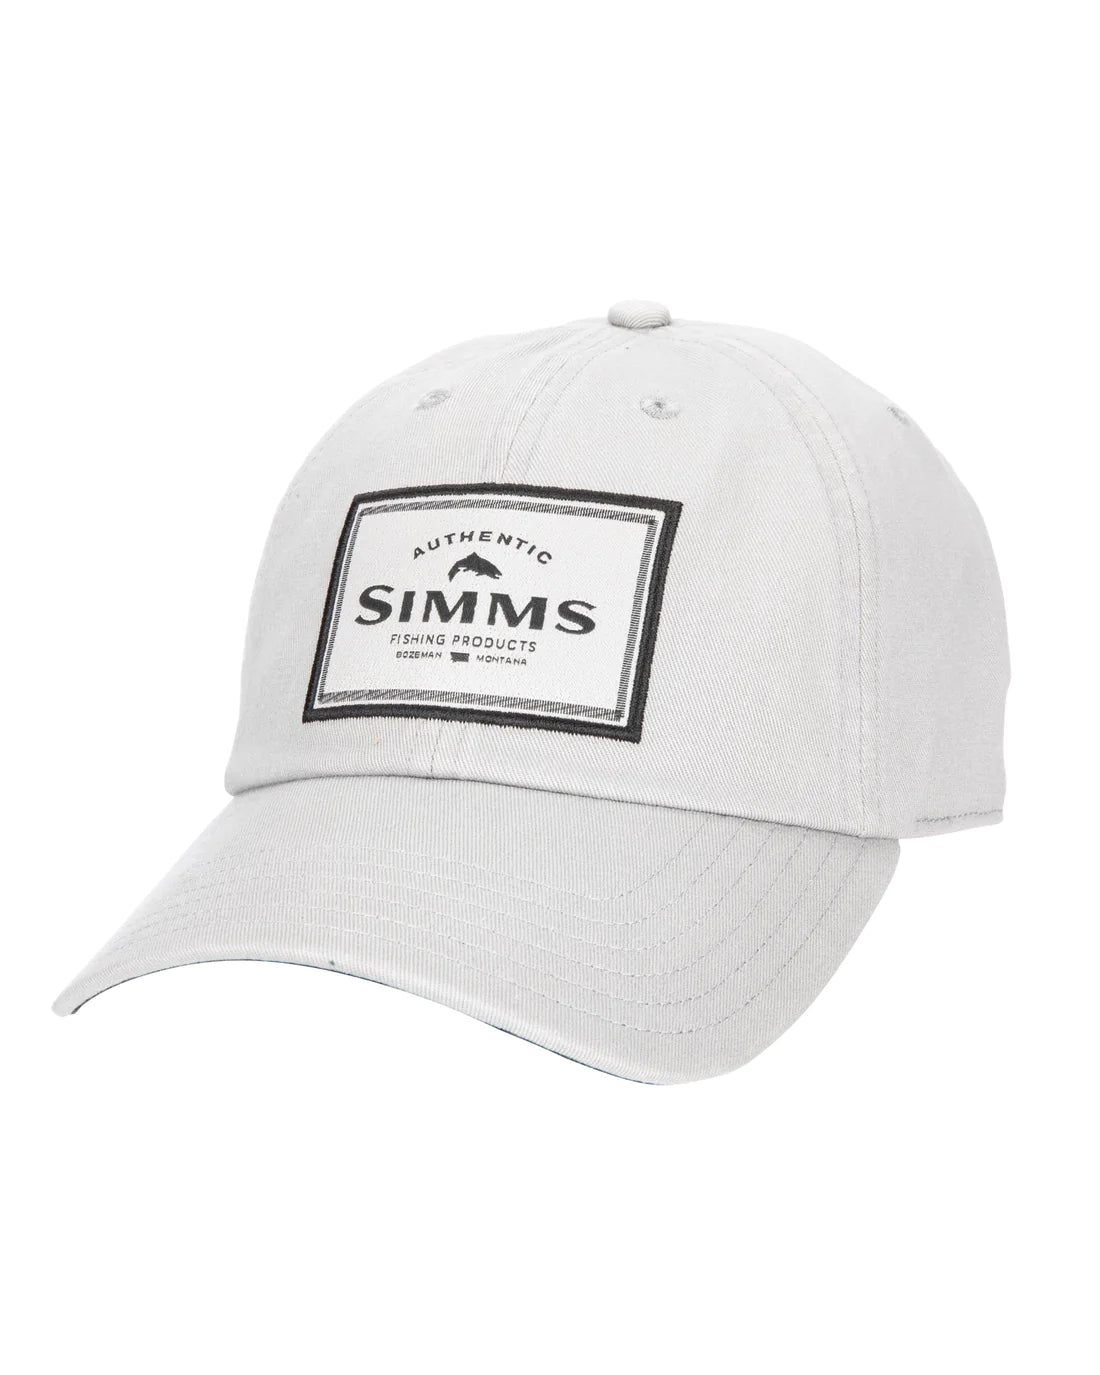 Simms Single Haul Cap - OSFM / STERLING - Mansfield Hunting & Fishing - Products to prepare for Corona Virus